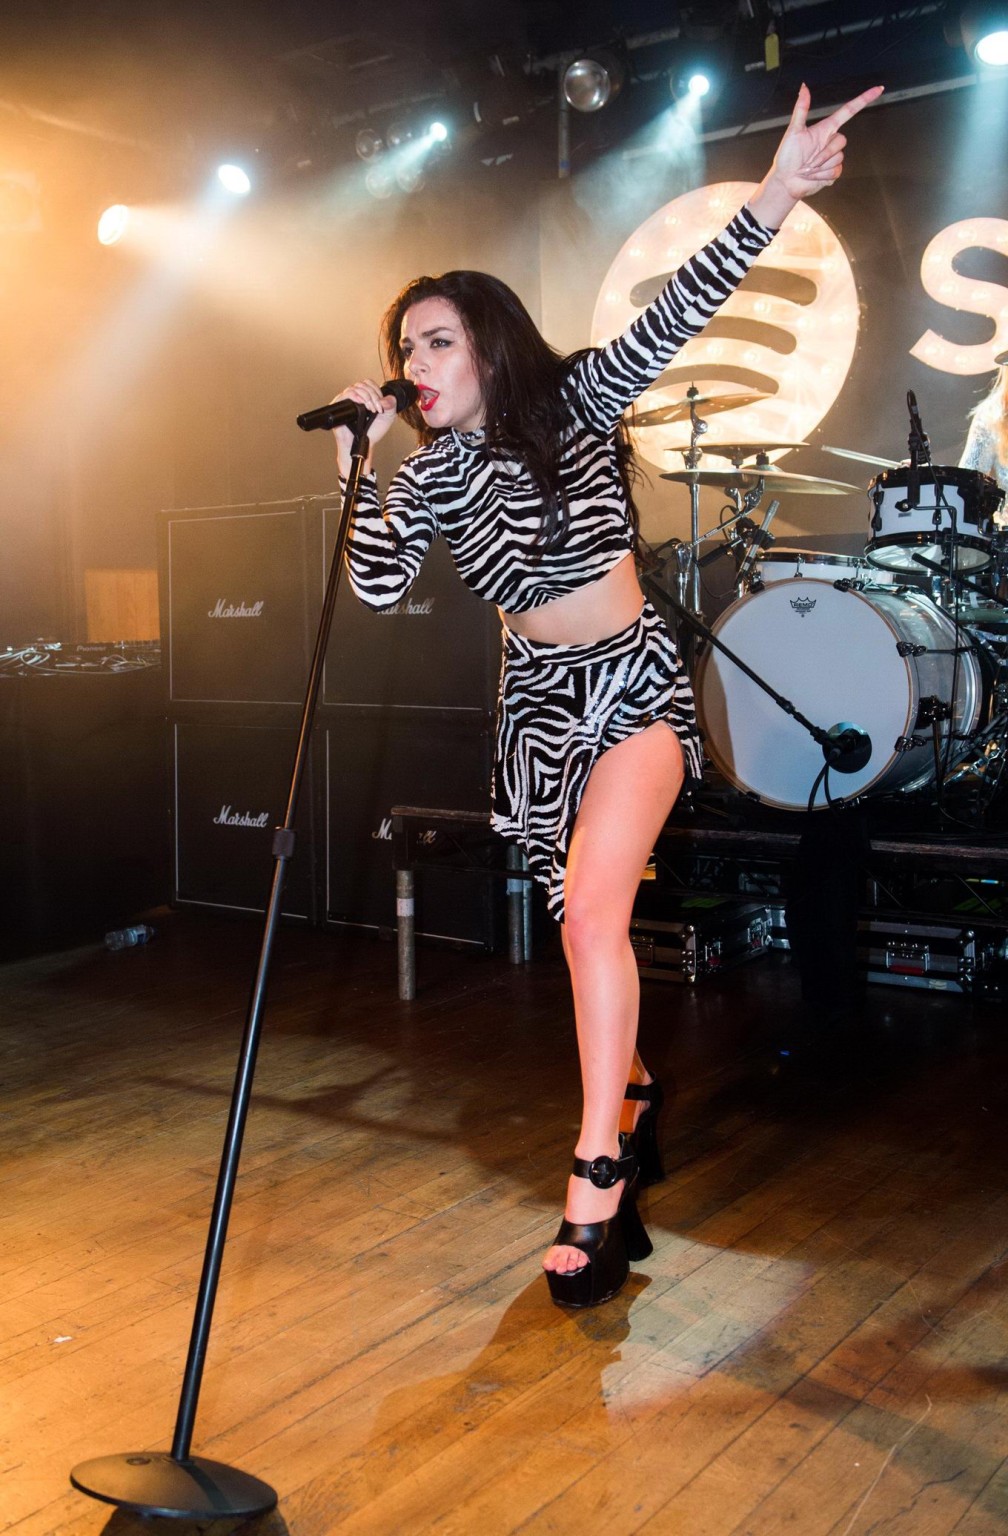 Charli XCX upskirt at the Spotify Opening Gig in London #75169027